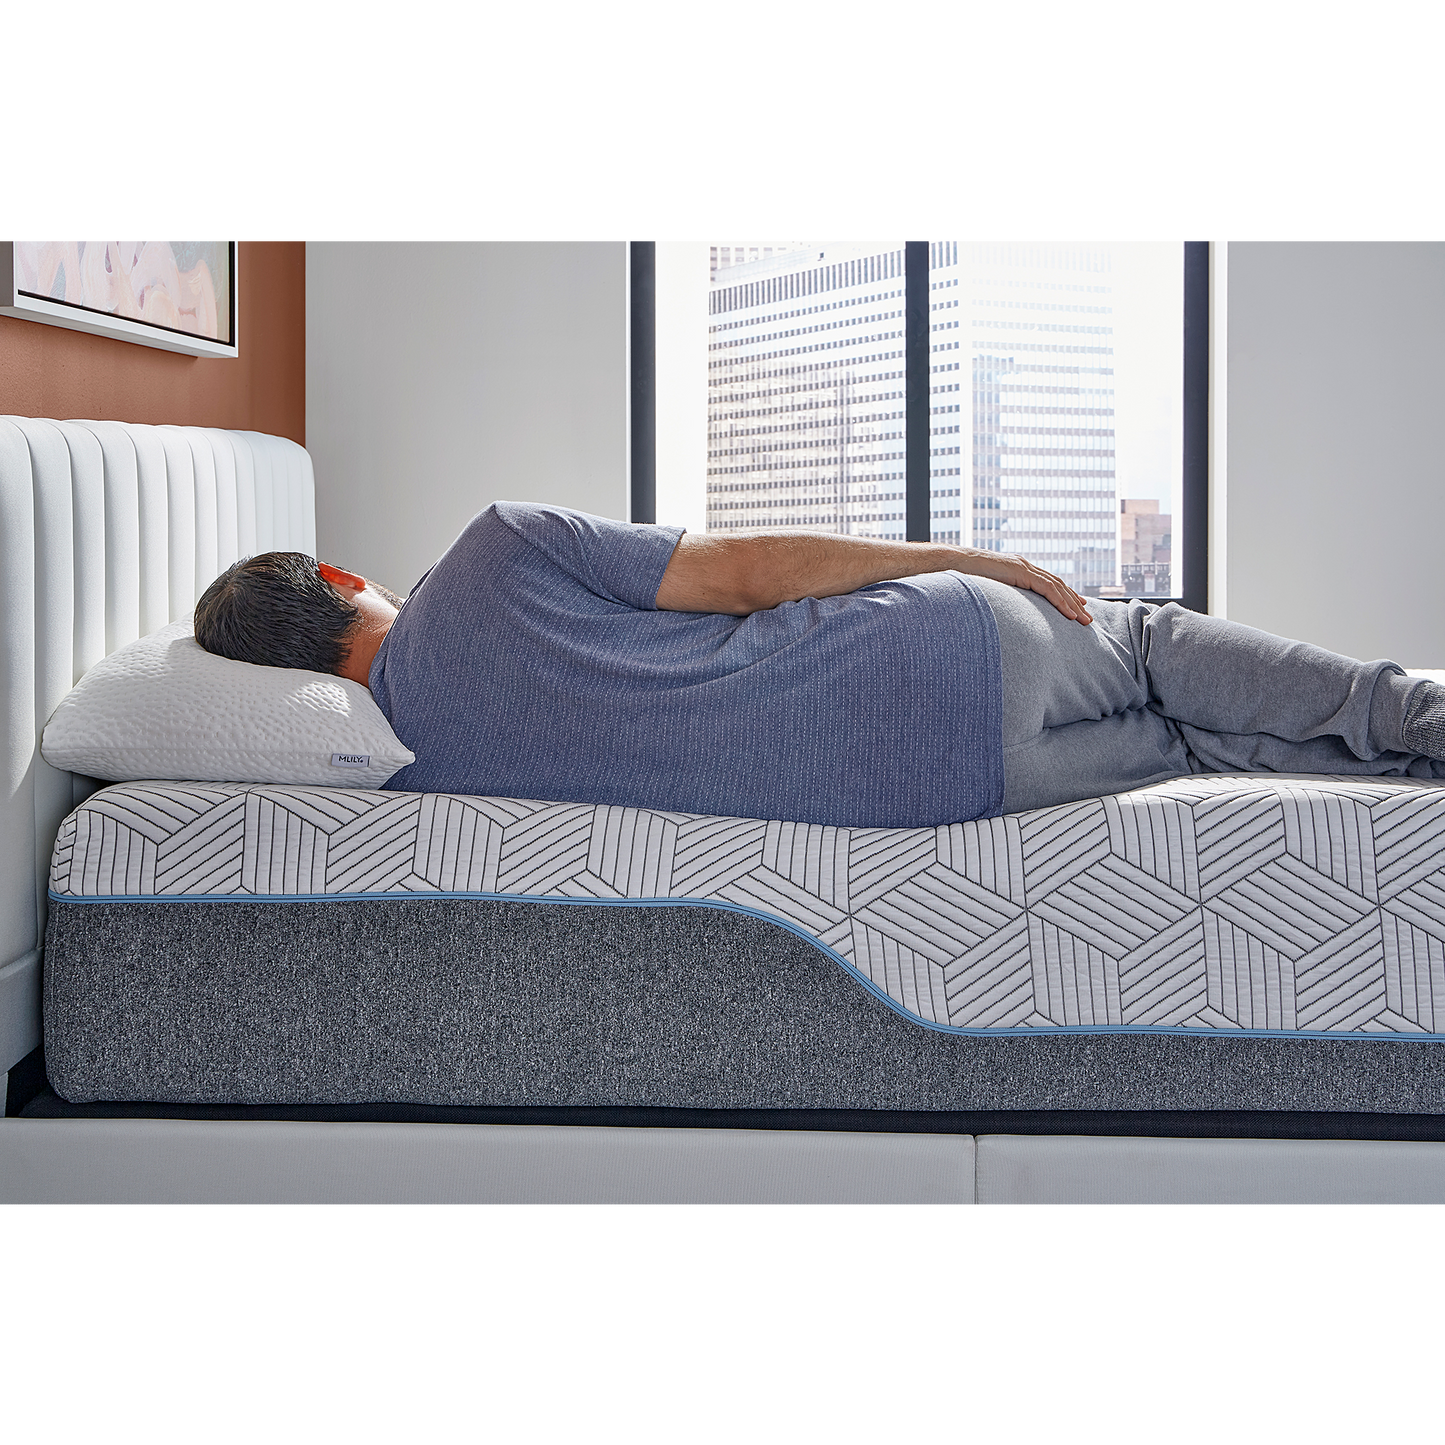 Harmony Chill 3.0 13" Memory Foam Mattress With Advanced Temperature Regulation Inside Of A Bedroom With A Man Sleeping On His Side